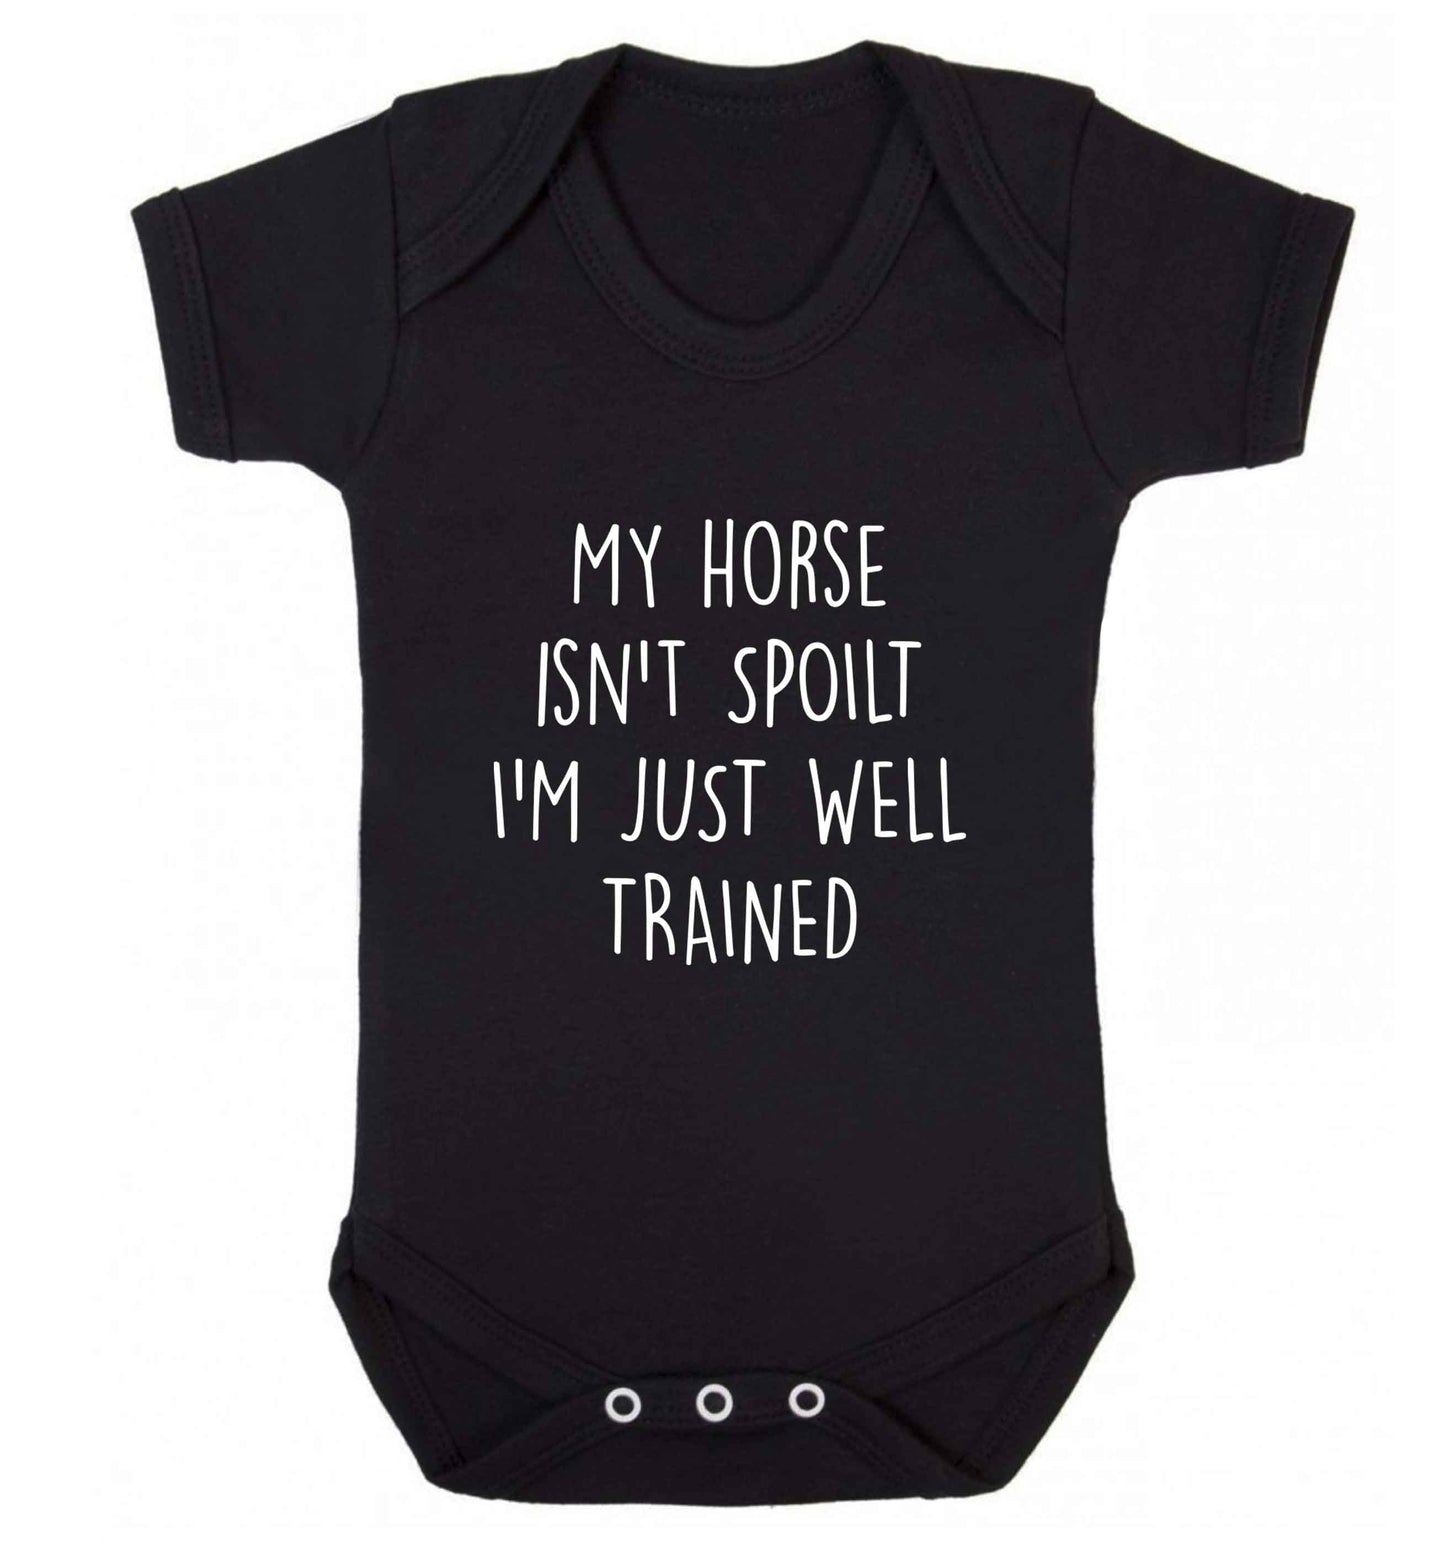 My horse isn't spoilt I'm just well trained baby vest black 18-24 months